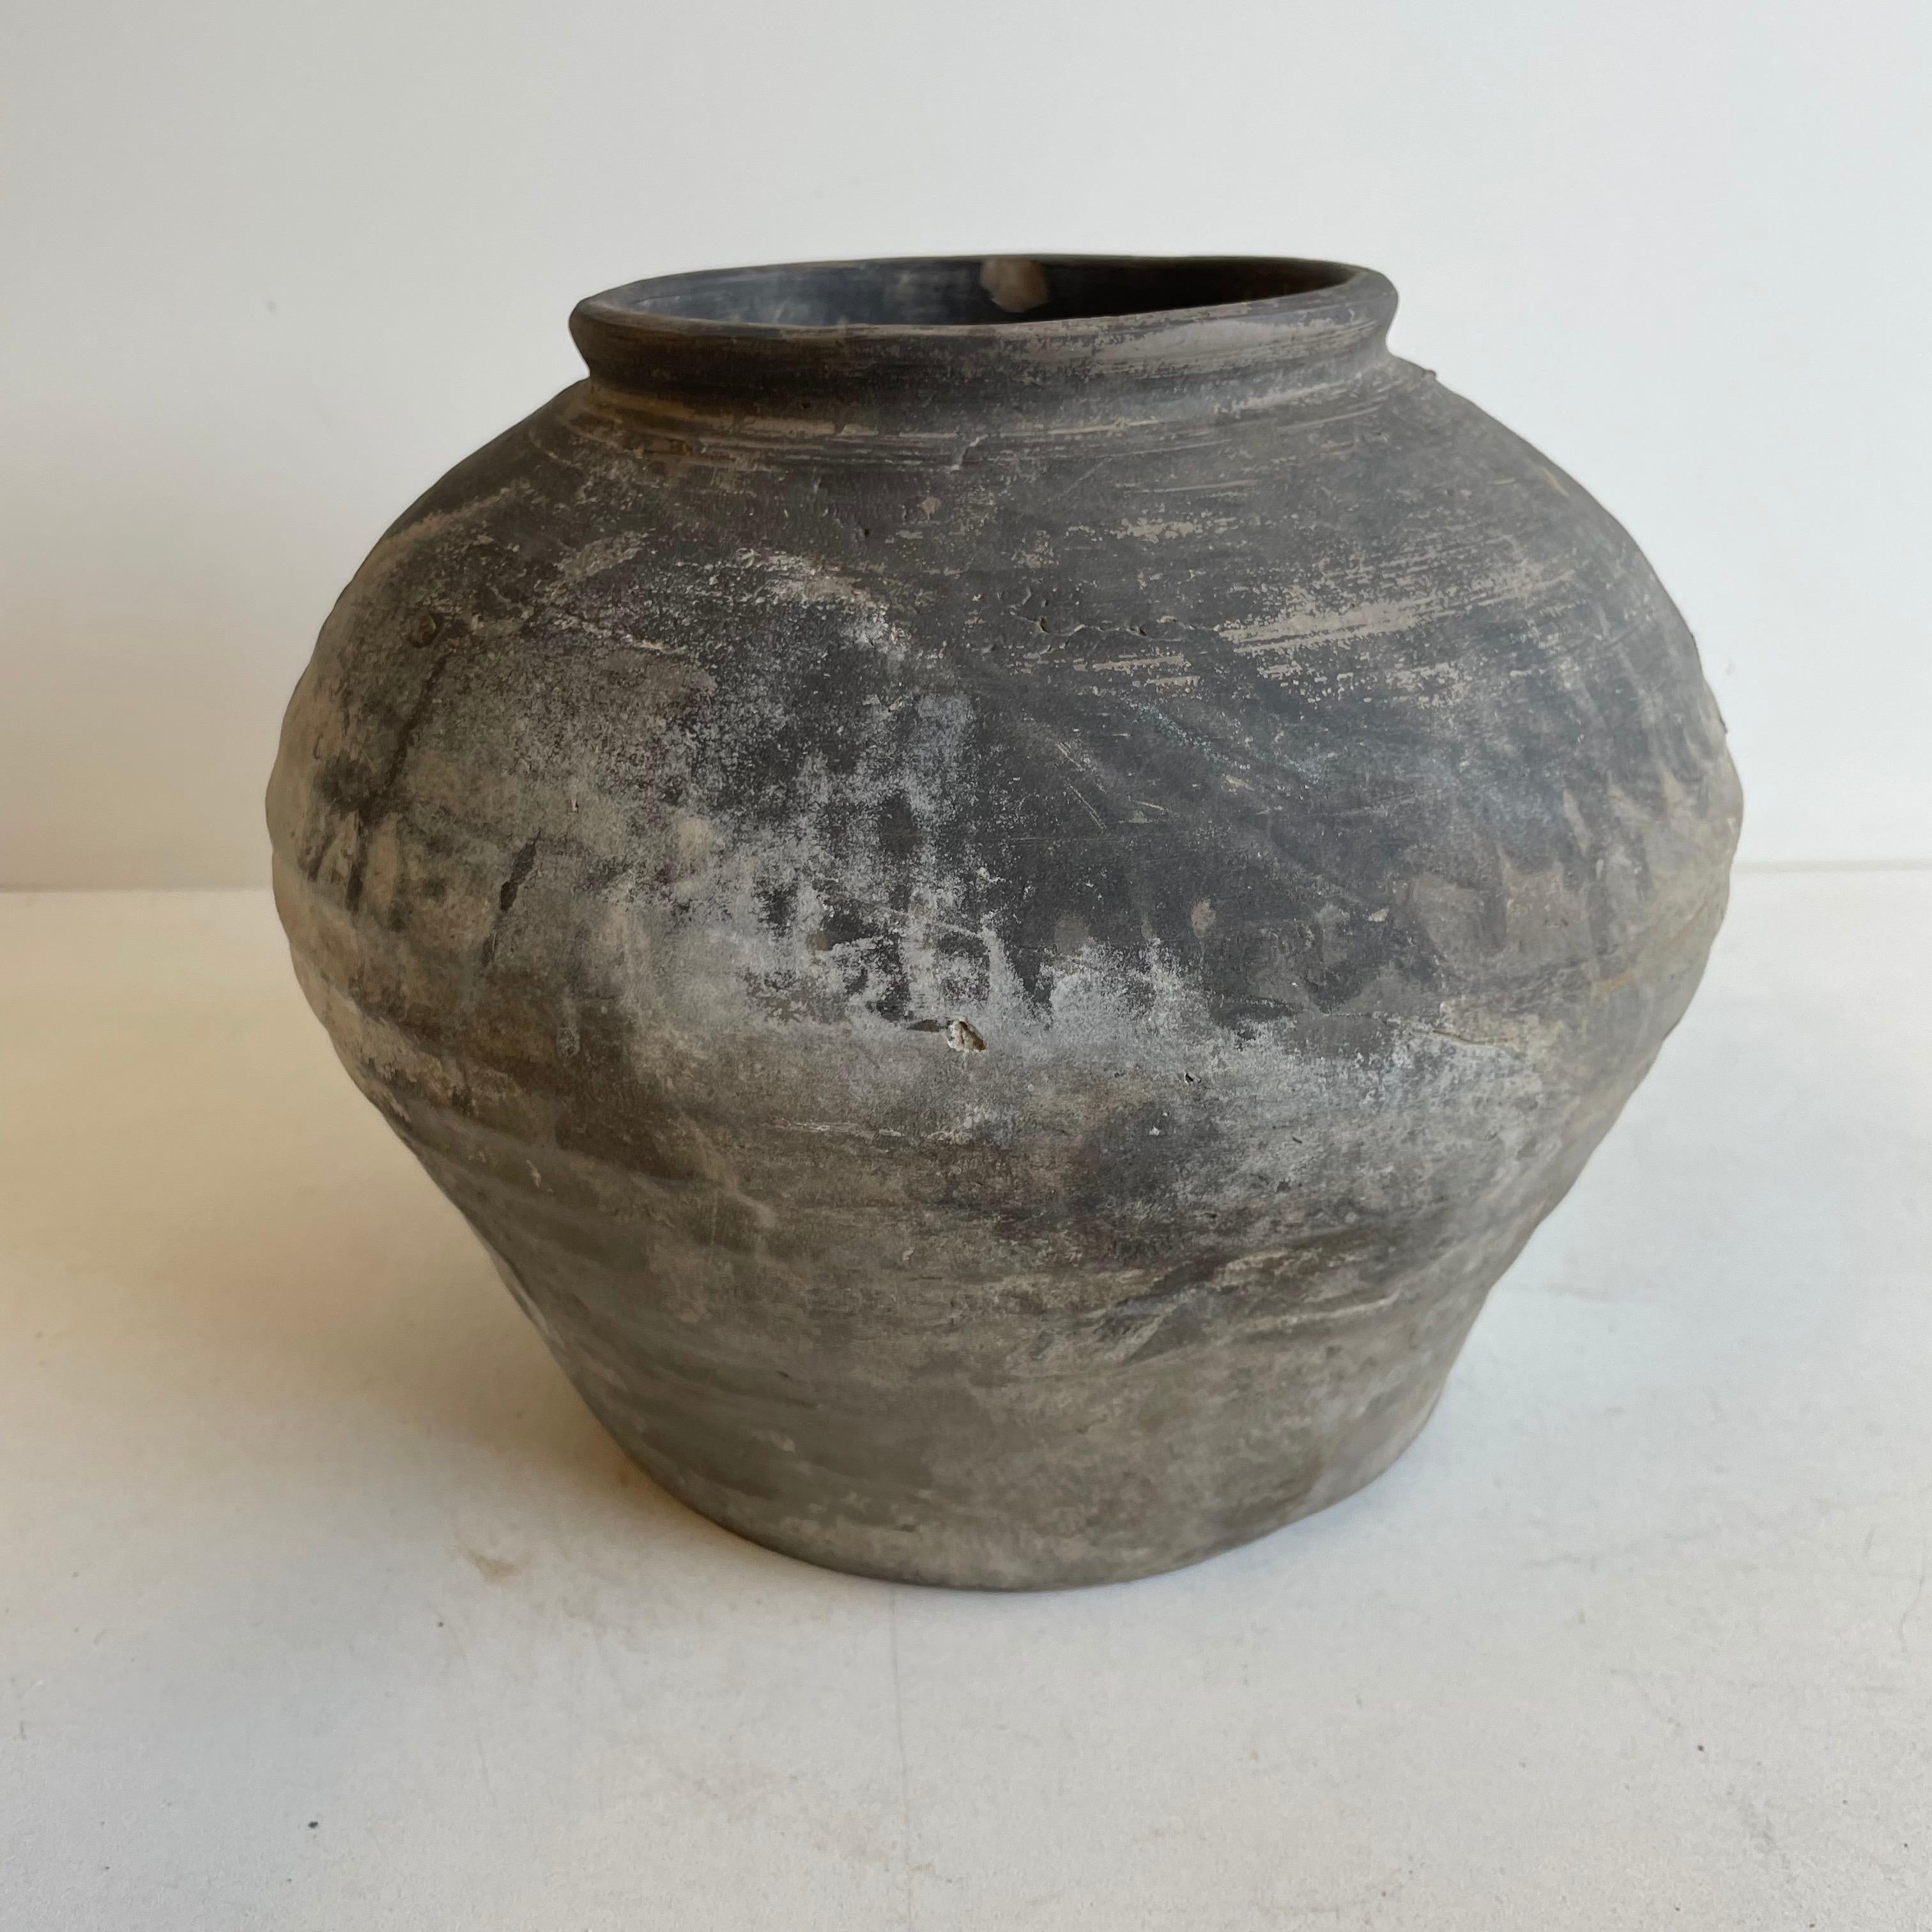 Vintage matte oil pots pottery
Beautifully terracotta rich in character, this vintage oil pot adds just the right amount of texture + warmth where you need it. Stunning glazed finish with warm terra-cotta accents, and dark grey tones.
Sizing: 9.5